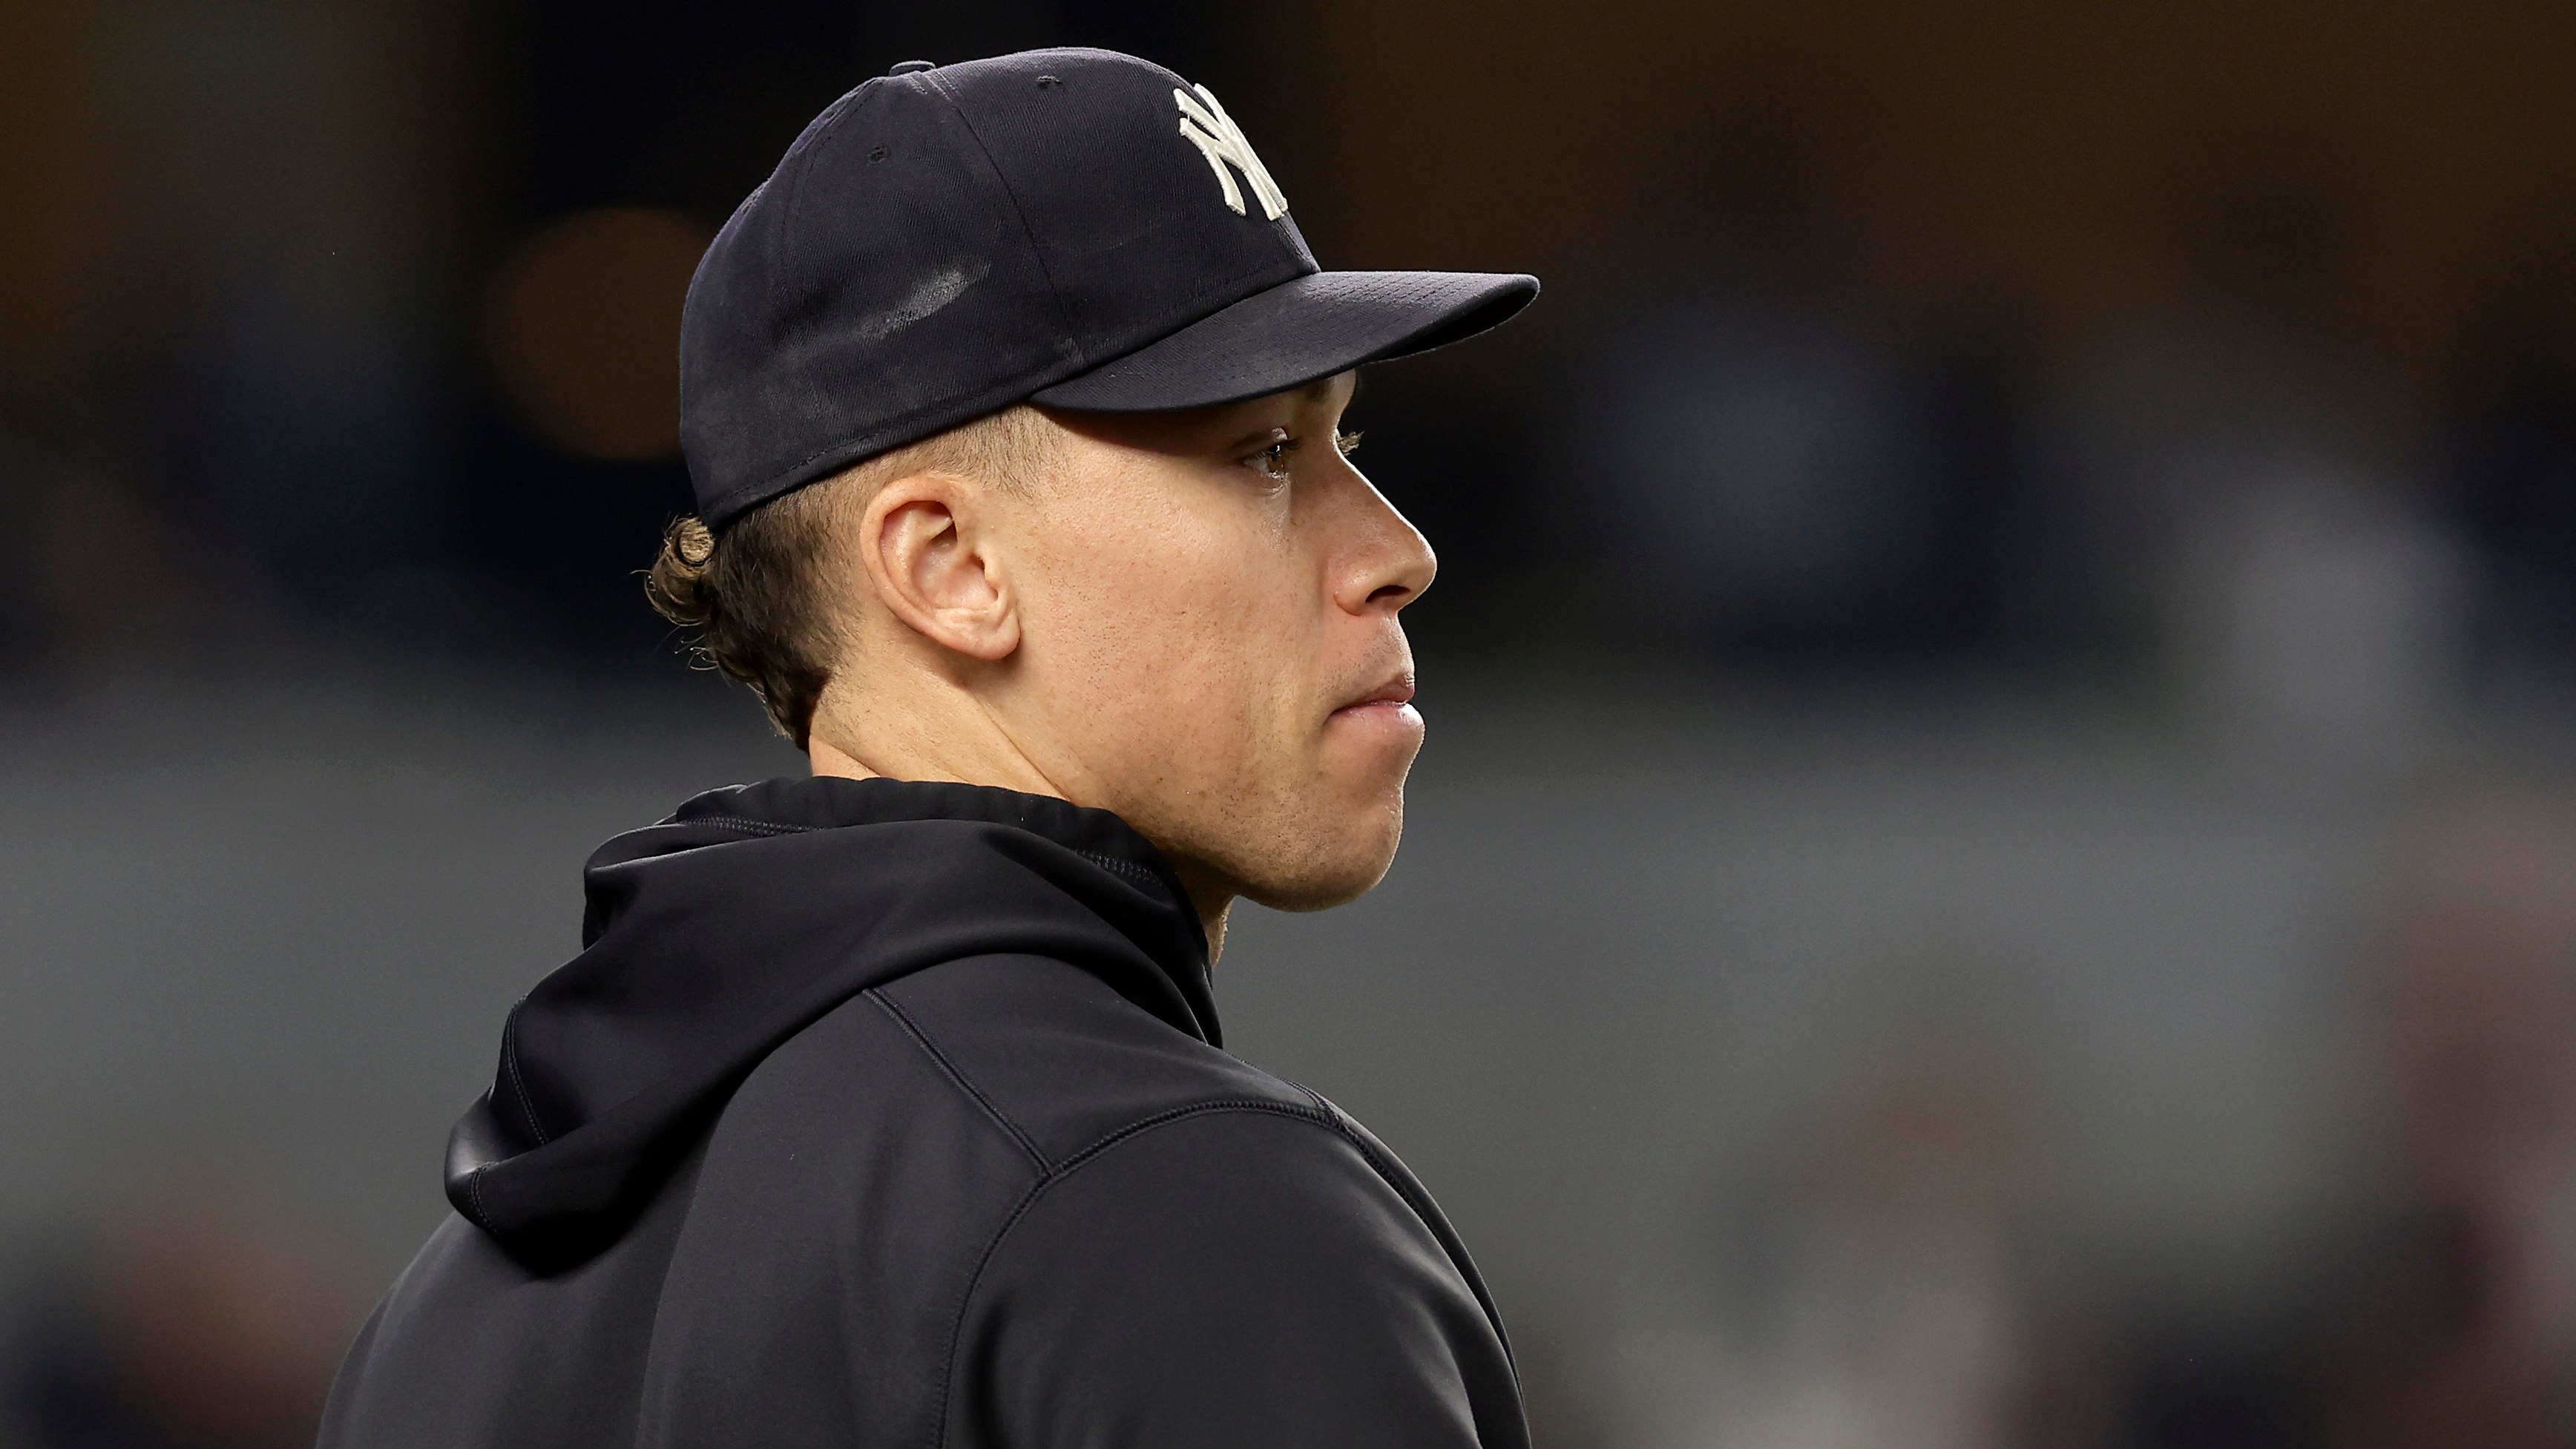 Yankees' Aaron Judge expected to return Tuesday from hip injury - NBC Sports